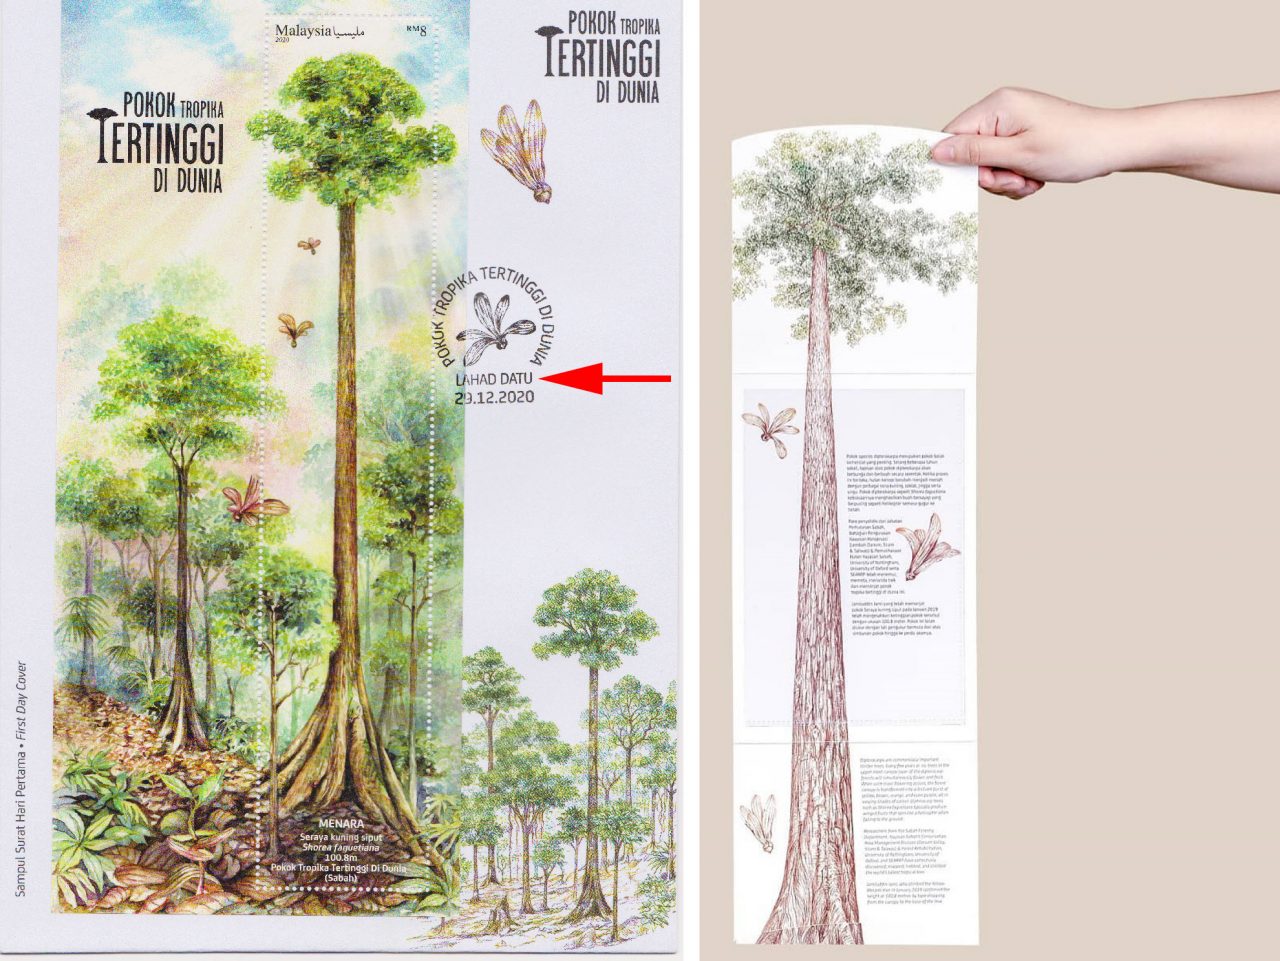 Left: miniature sheet of Menara is the largest stamp of Malaysia. Right: the long stamp folder for the World's tallest tropical tree